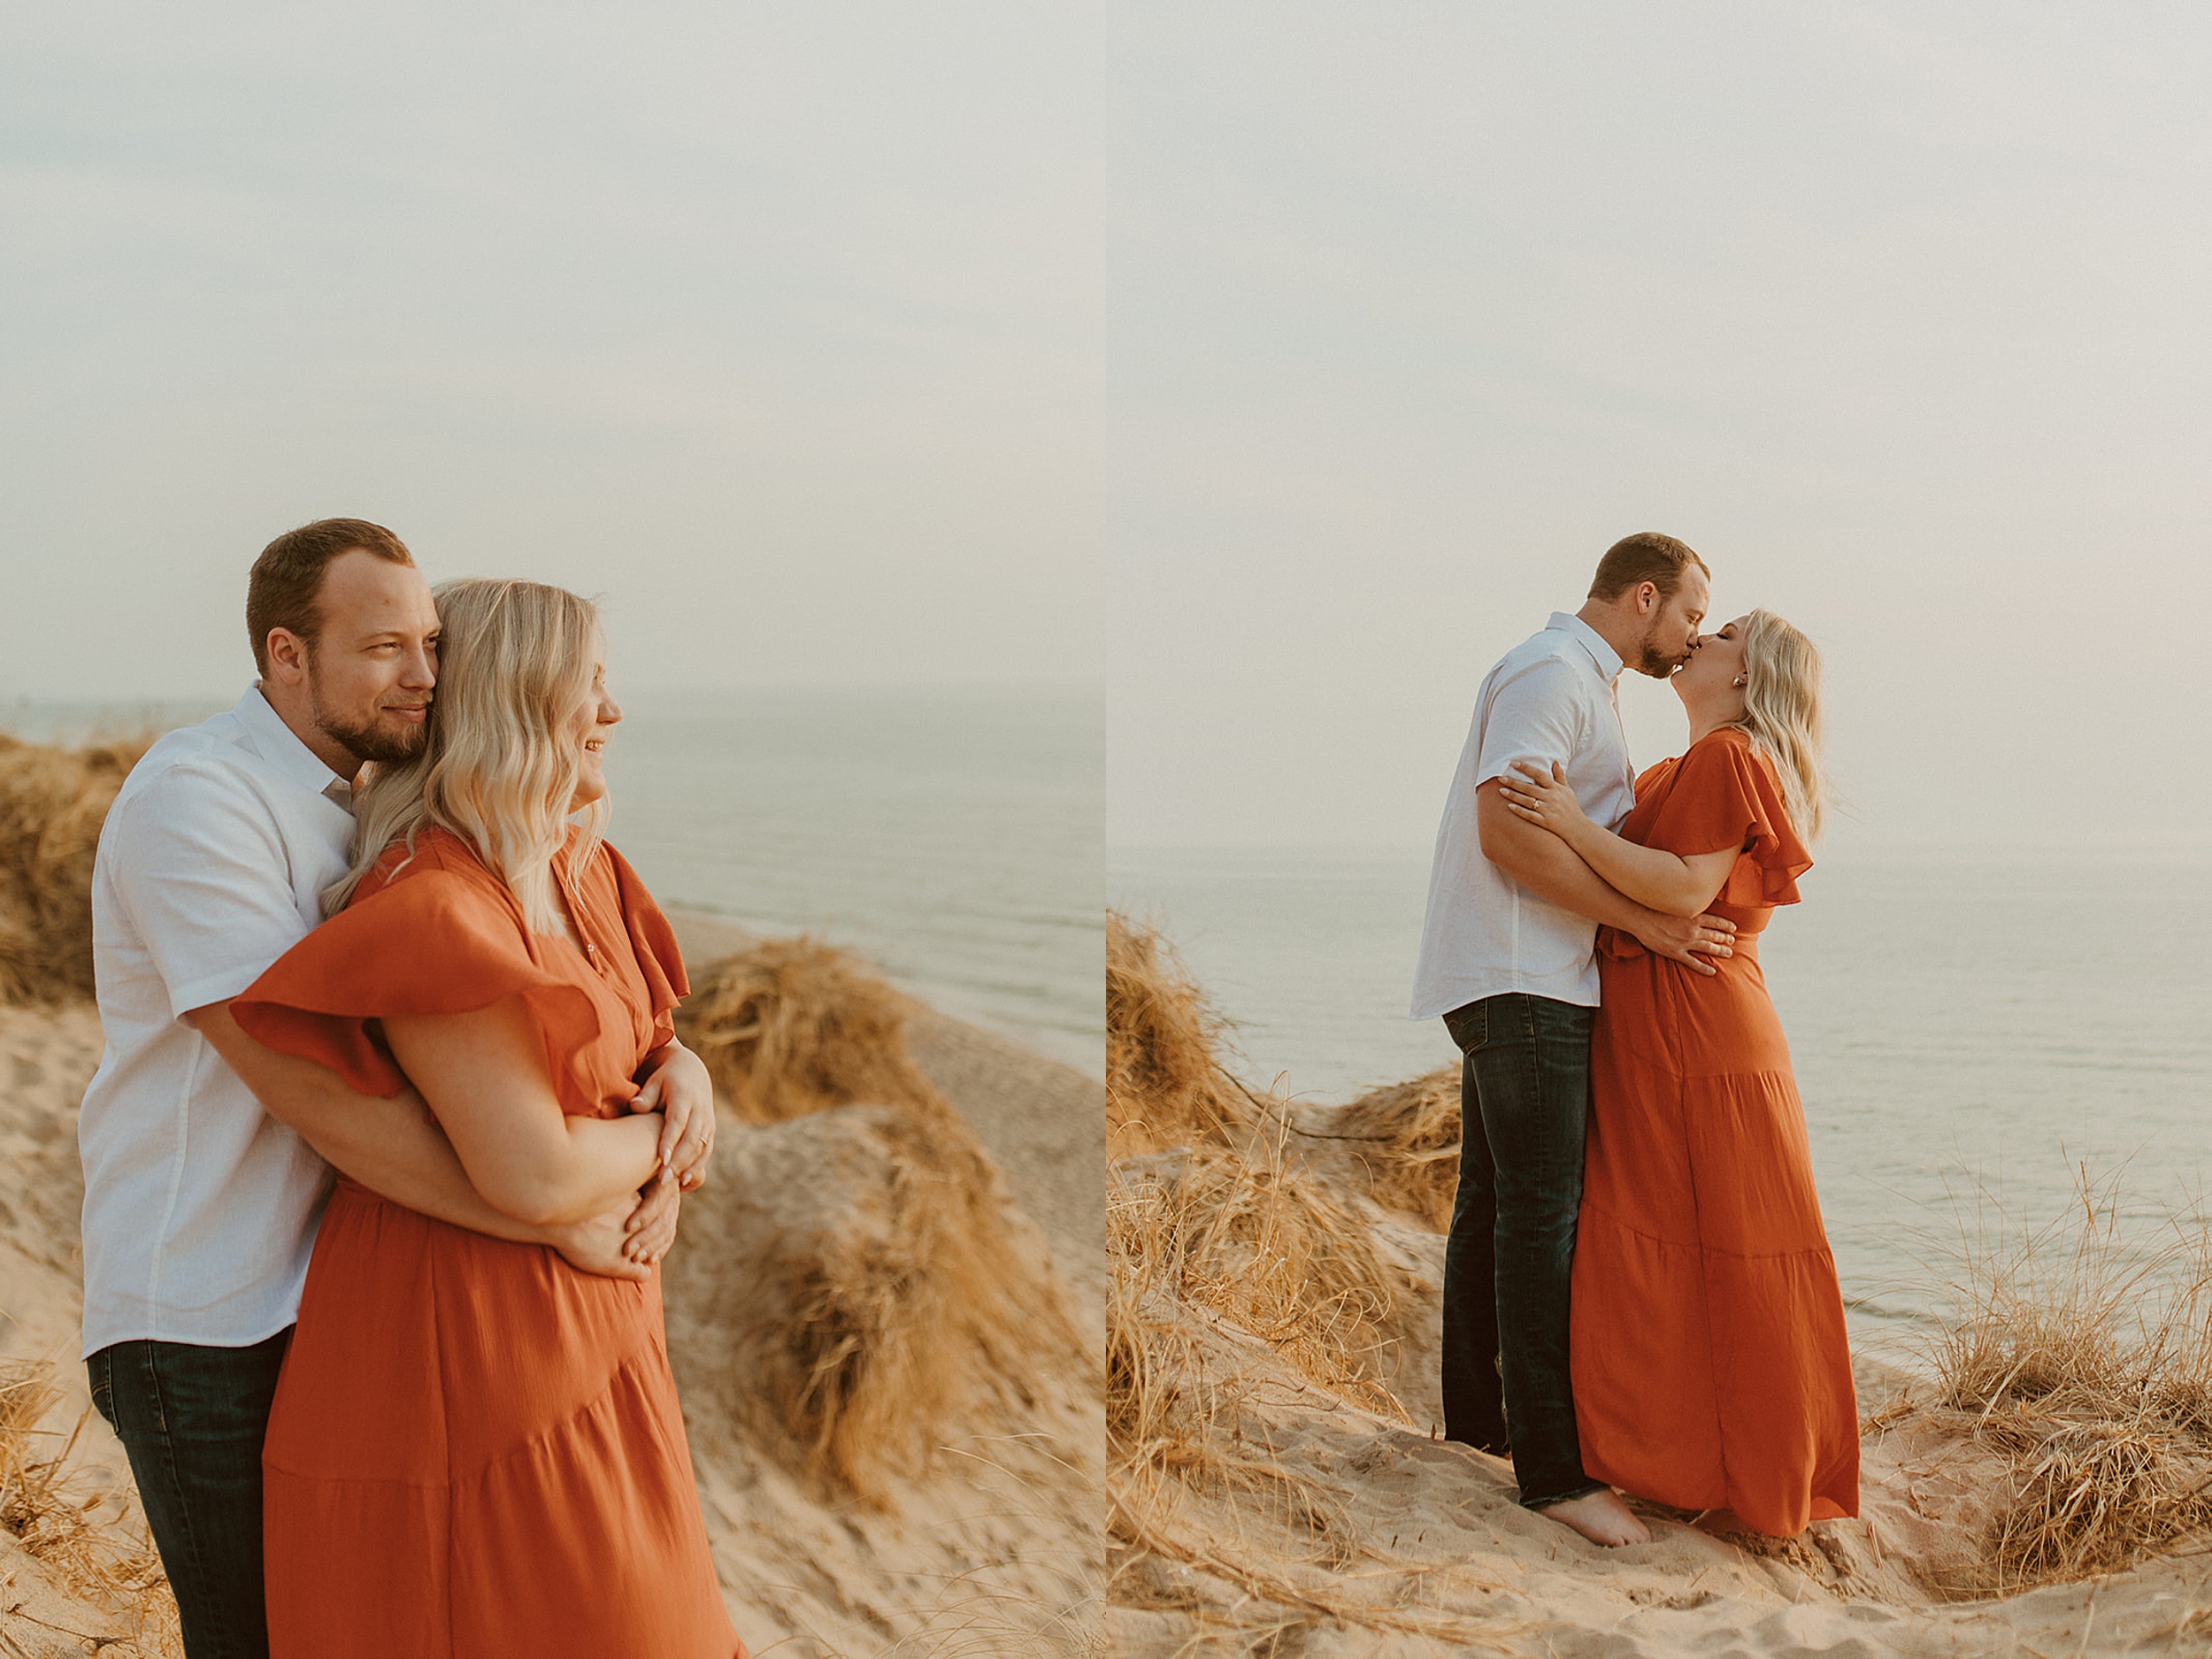  couple embracing on a shore next to a beach